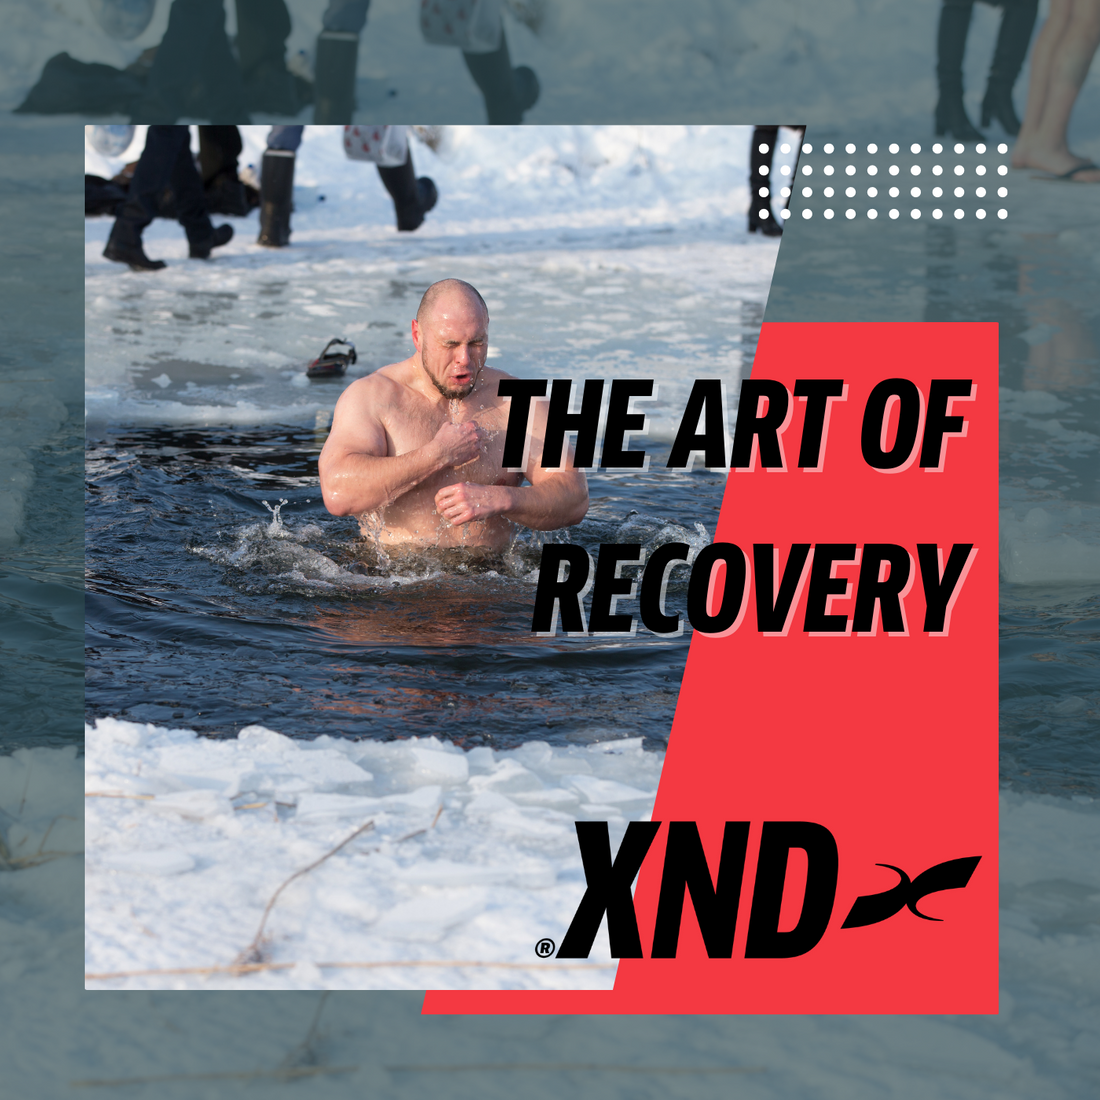 The art of recovery